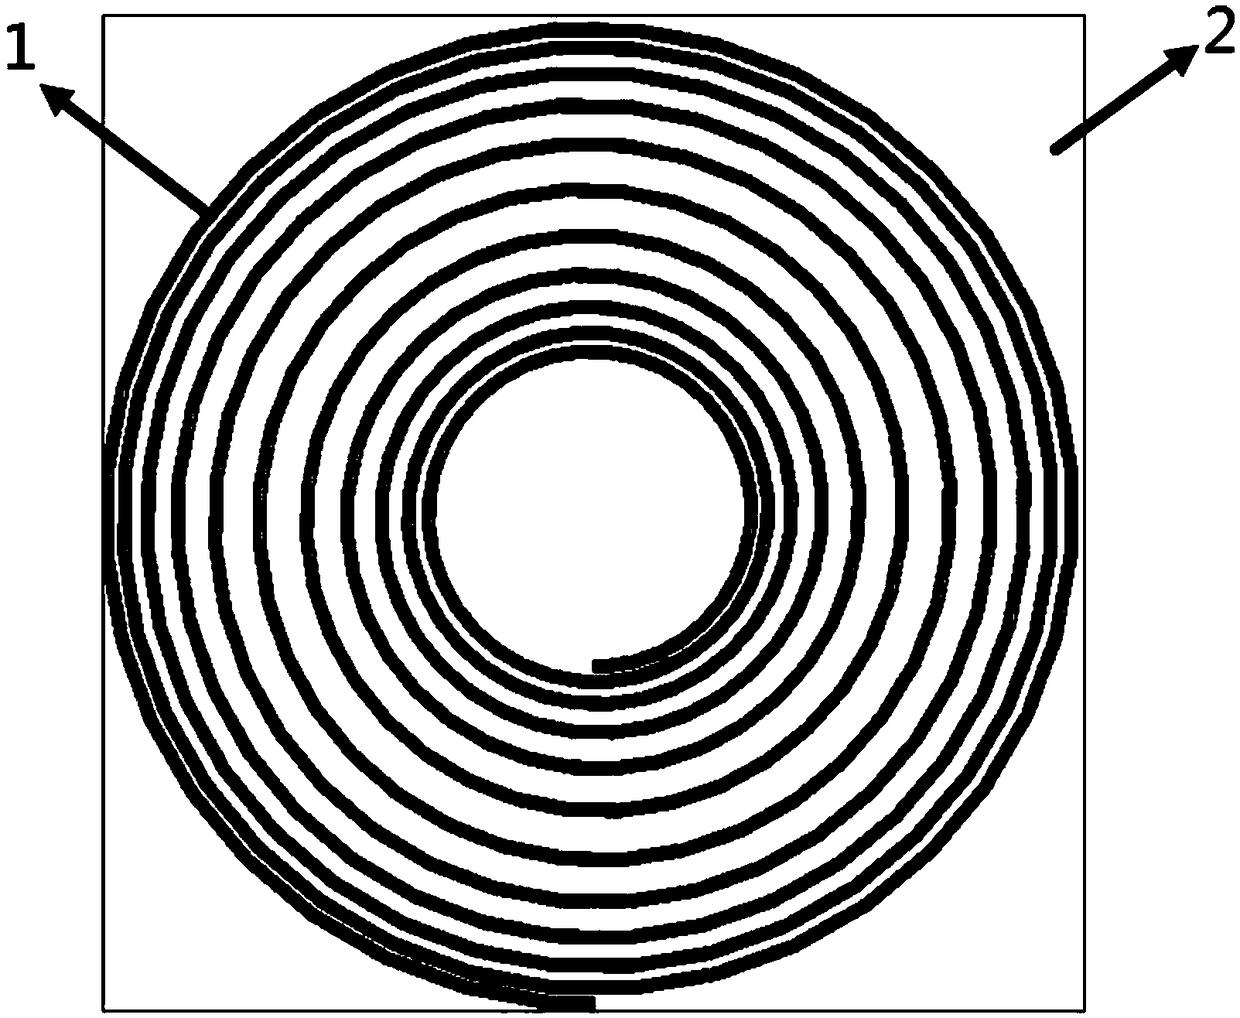 A variable turn pitch planar helical coil